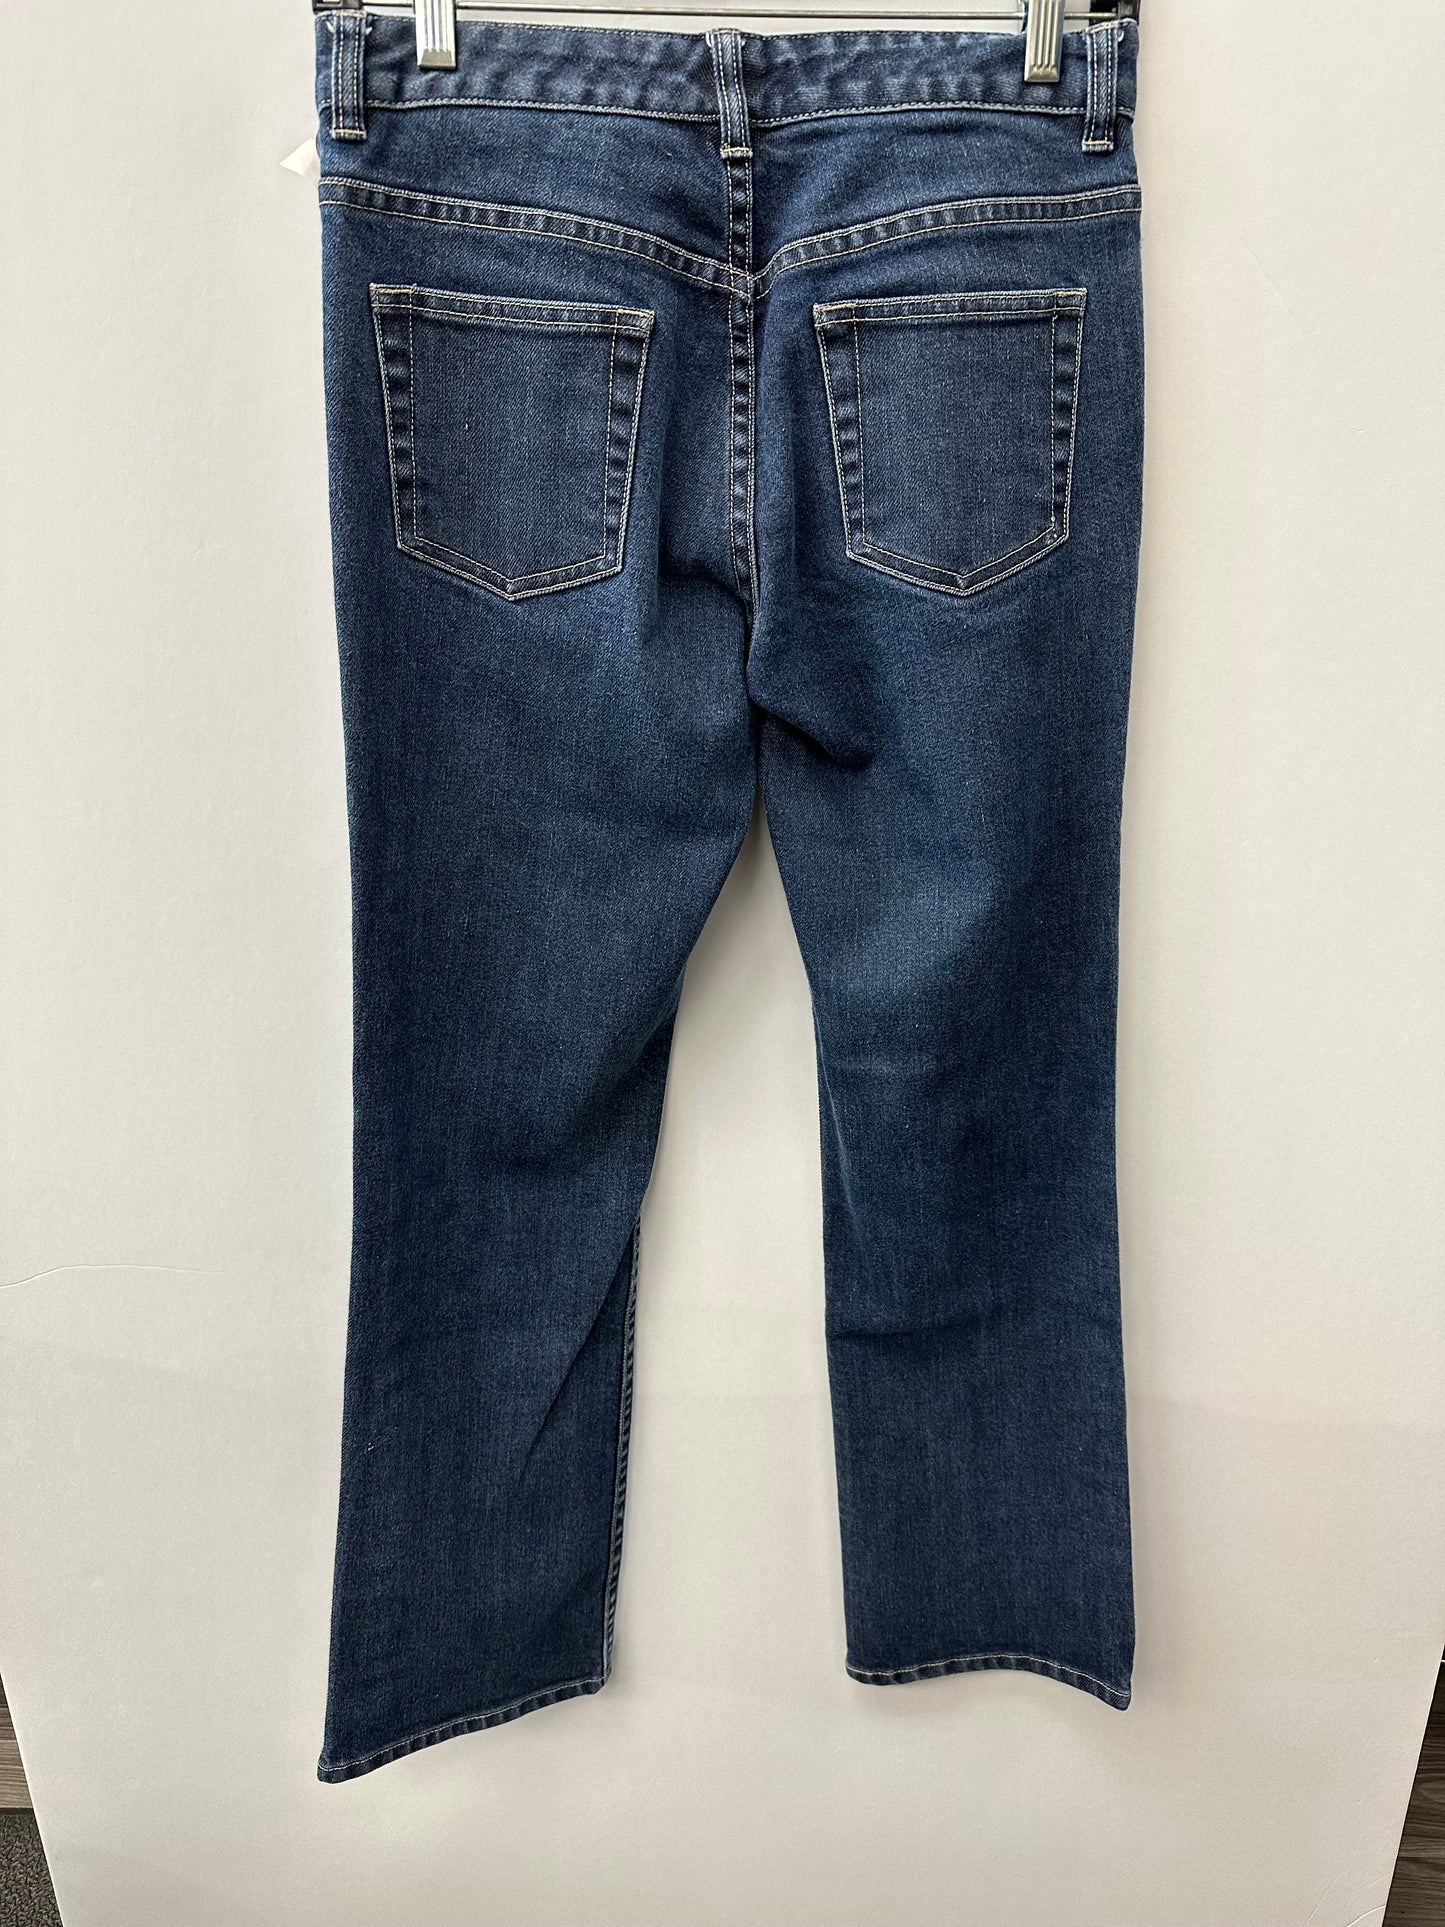 Jeans Boot Cut By Banana Republic  Size: 4